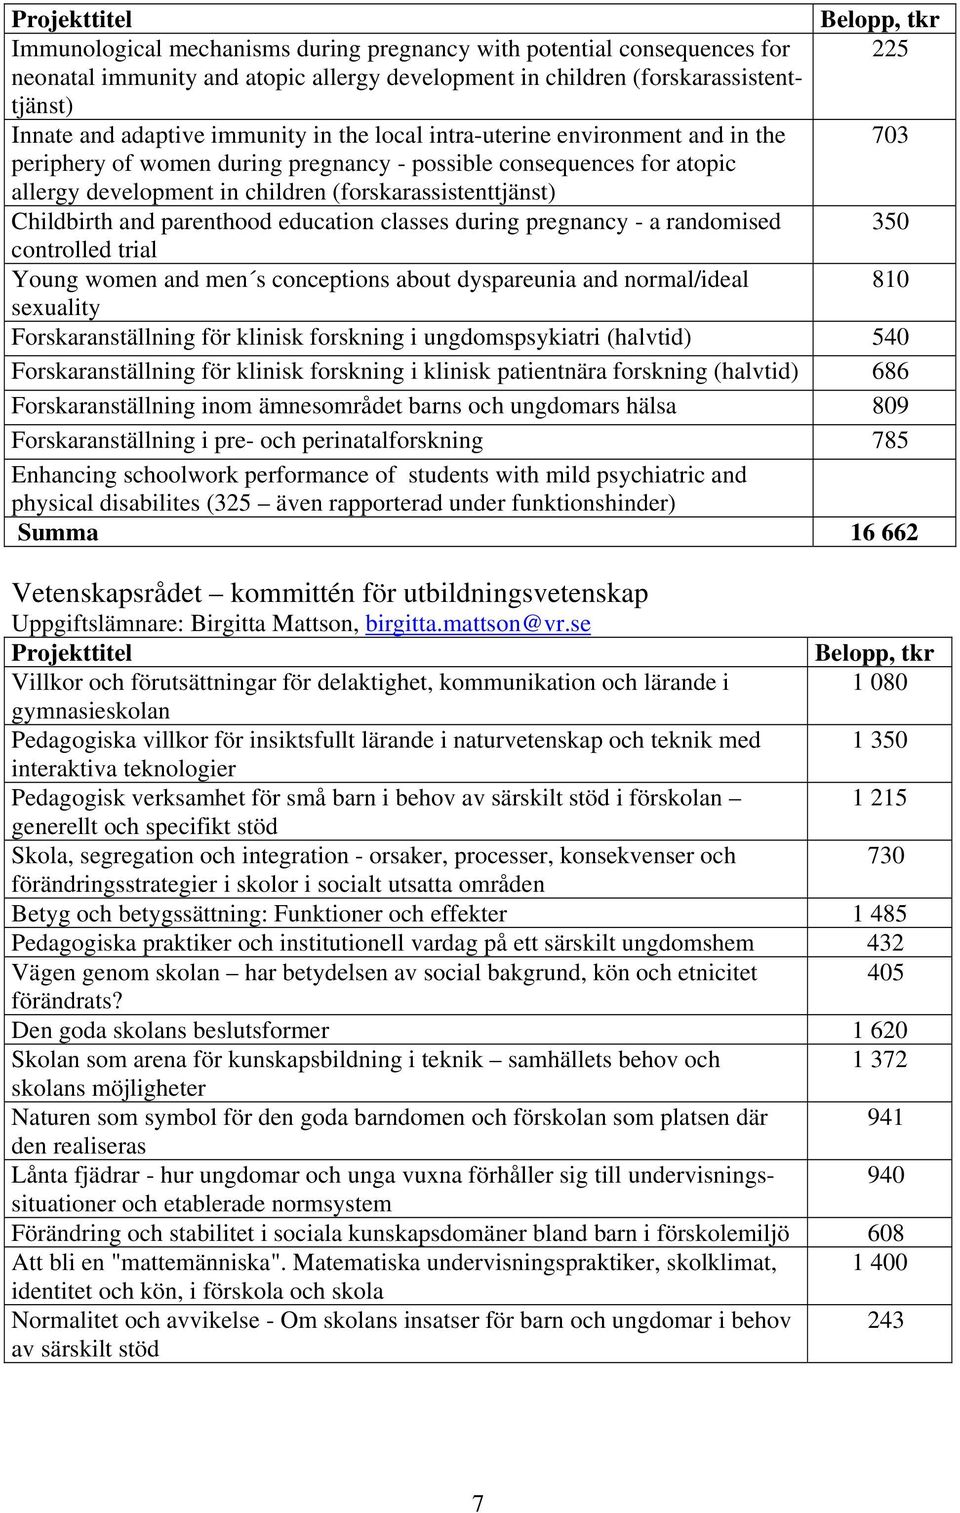 parenthood education classes during pregnancy - a randomised 350 controlled trial Young women and men s conceptions about dyspareunia and normal/ideal 810 sexuality Forskaranställning för klinisk